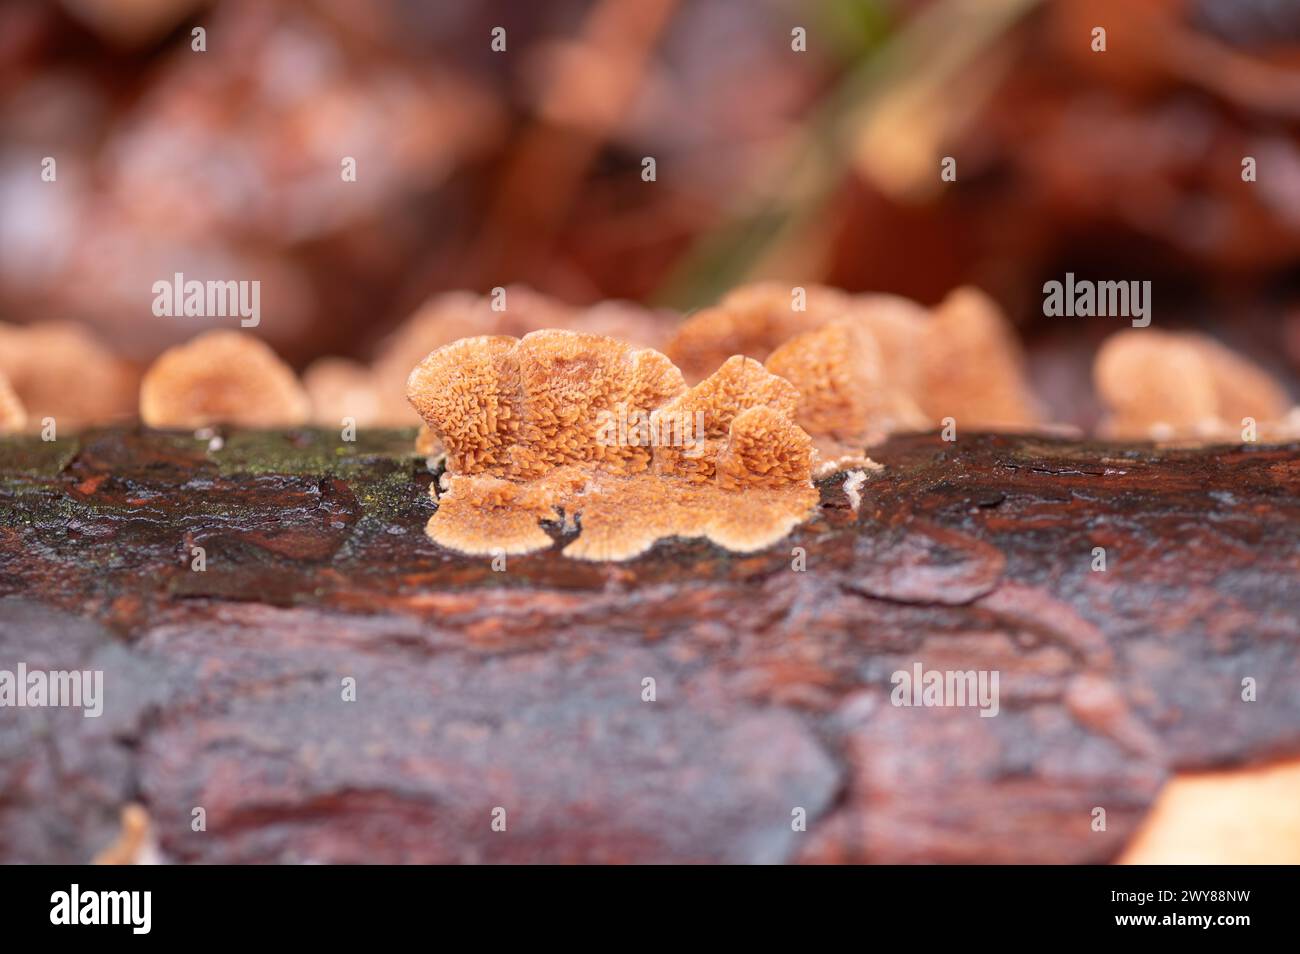 Ochre spreading tooth fungus, Steccherinum ochraceum, growing on the fallen branch of a pine tree. Stock Photo